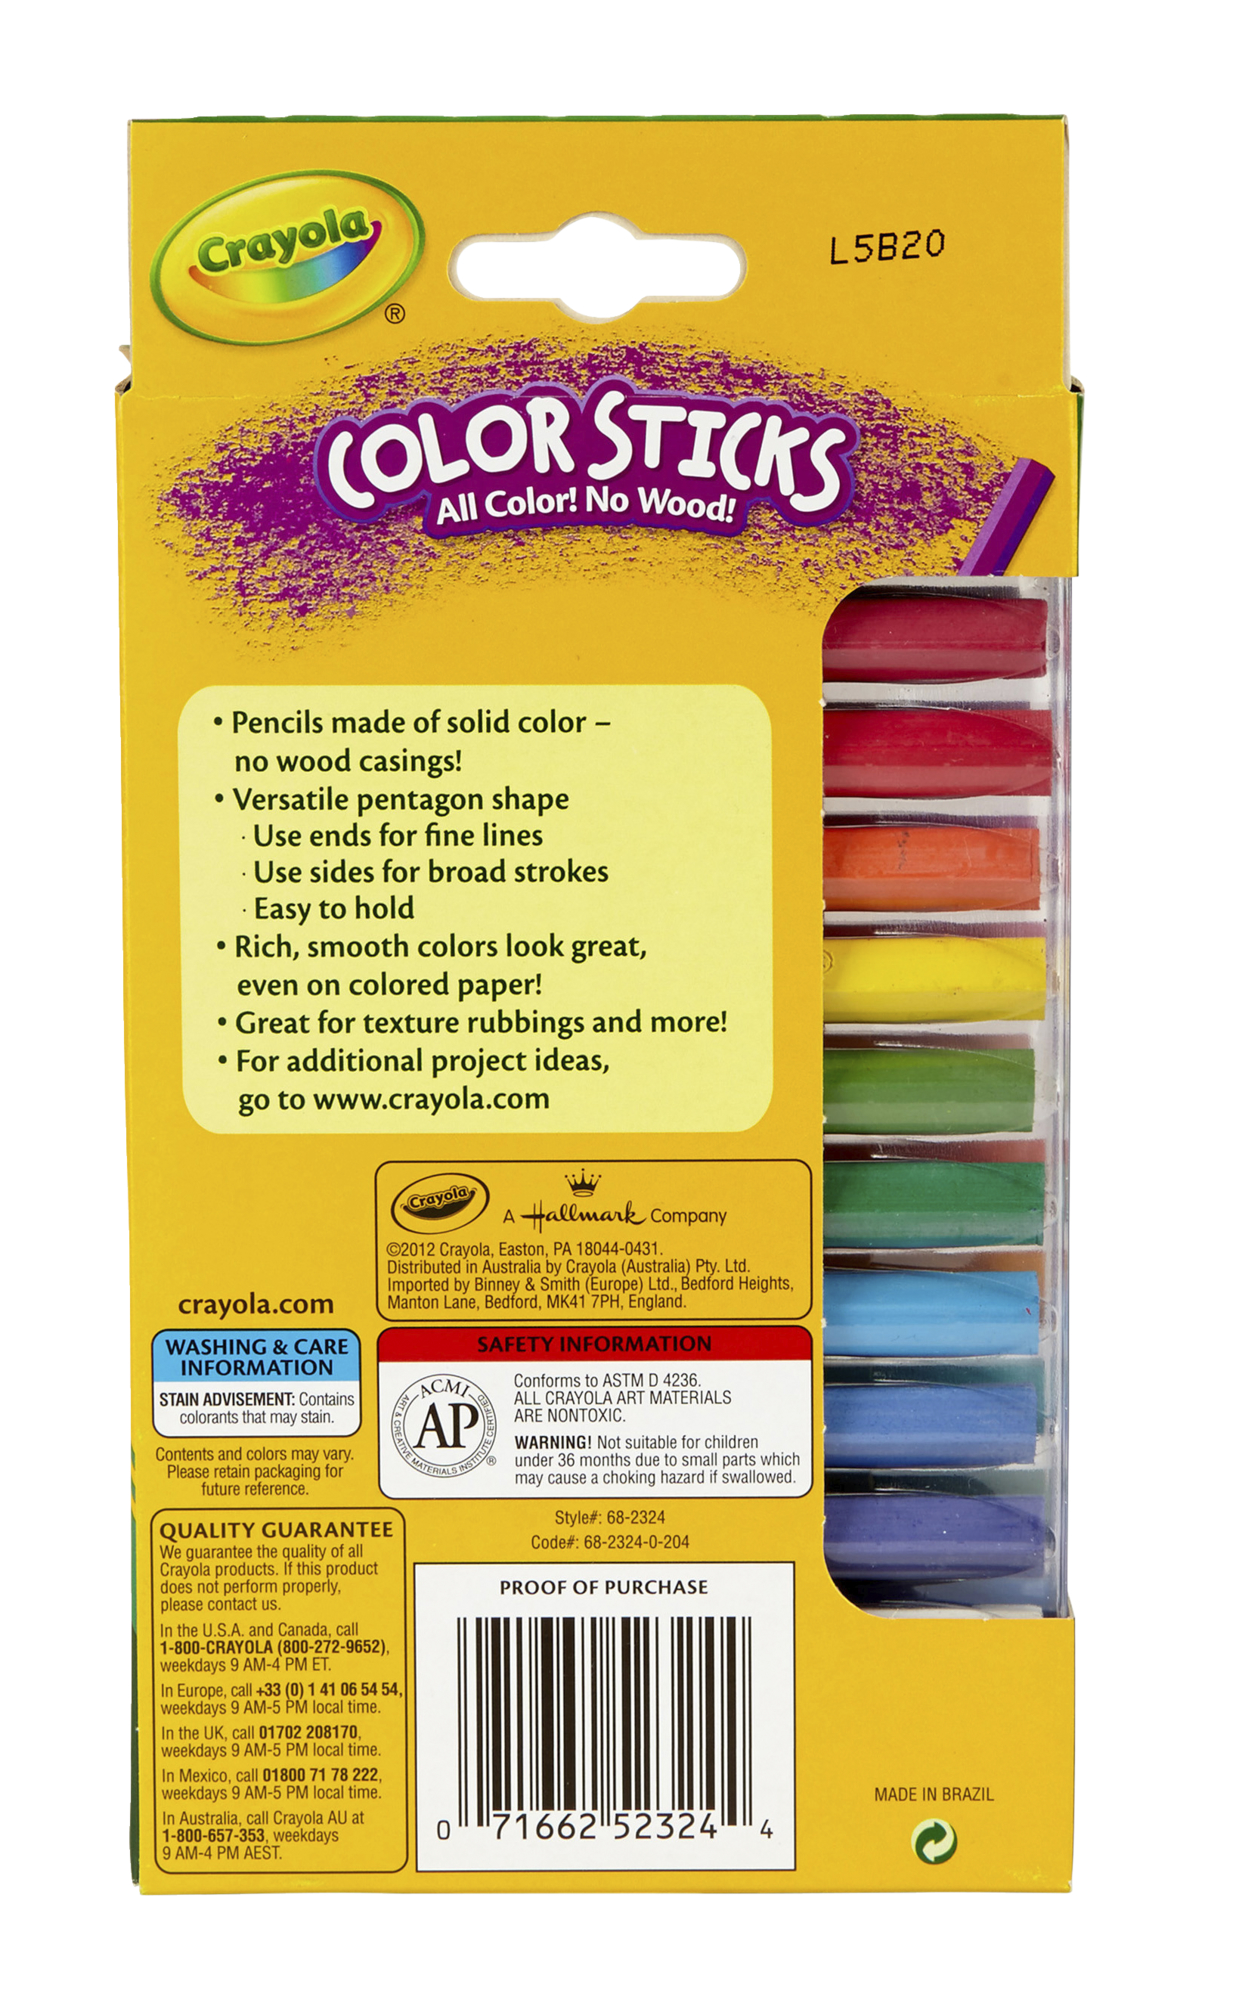 Crayola Color Sticks Woodless Pentagon Colored Pencils, Assorted Colors, Set of 24 - image 4 of 4